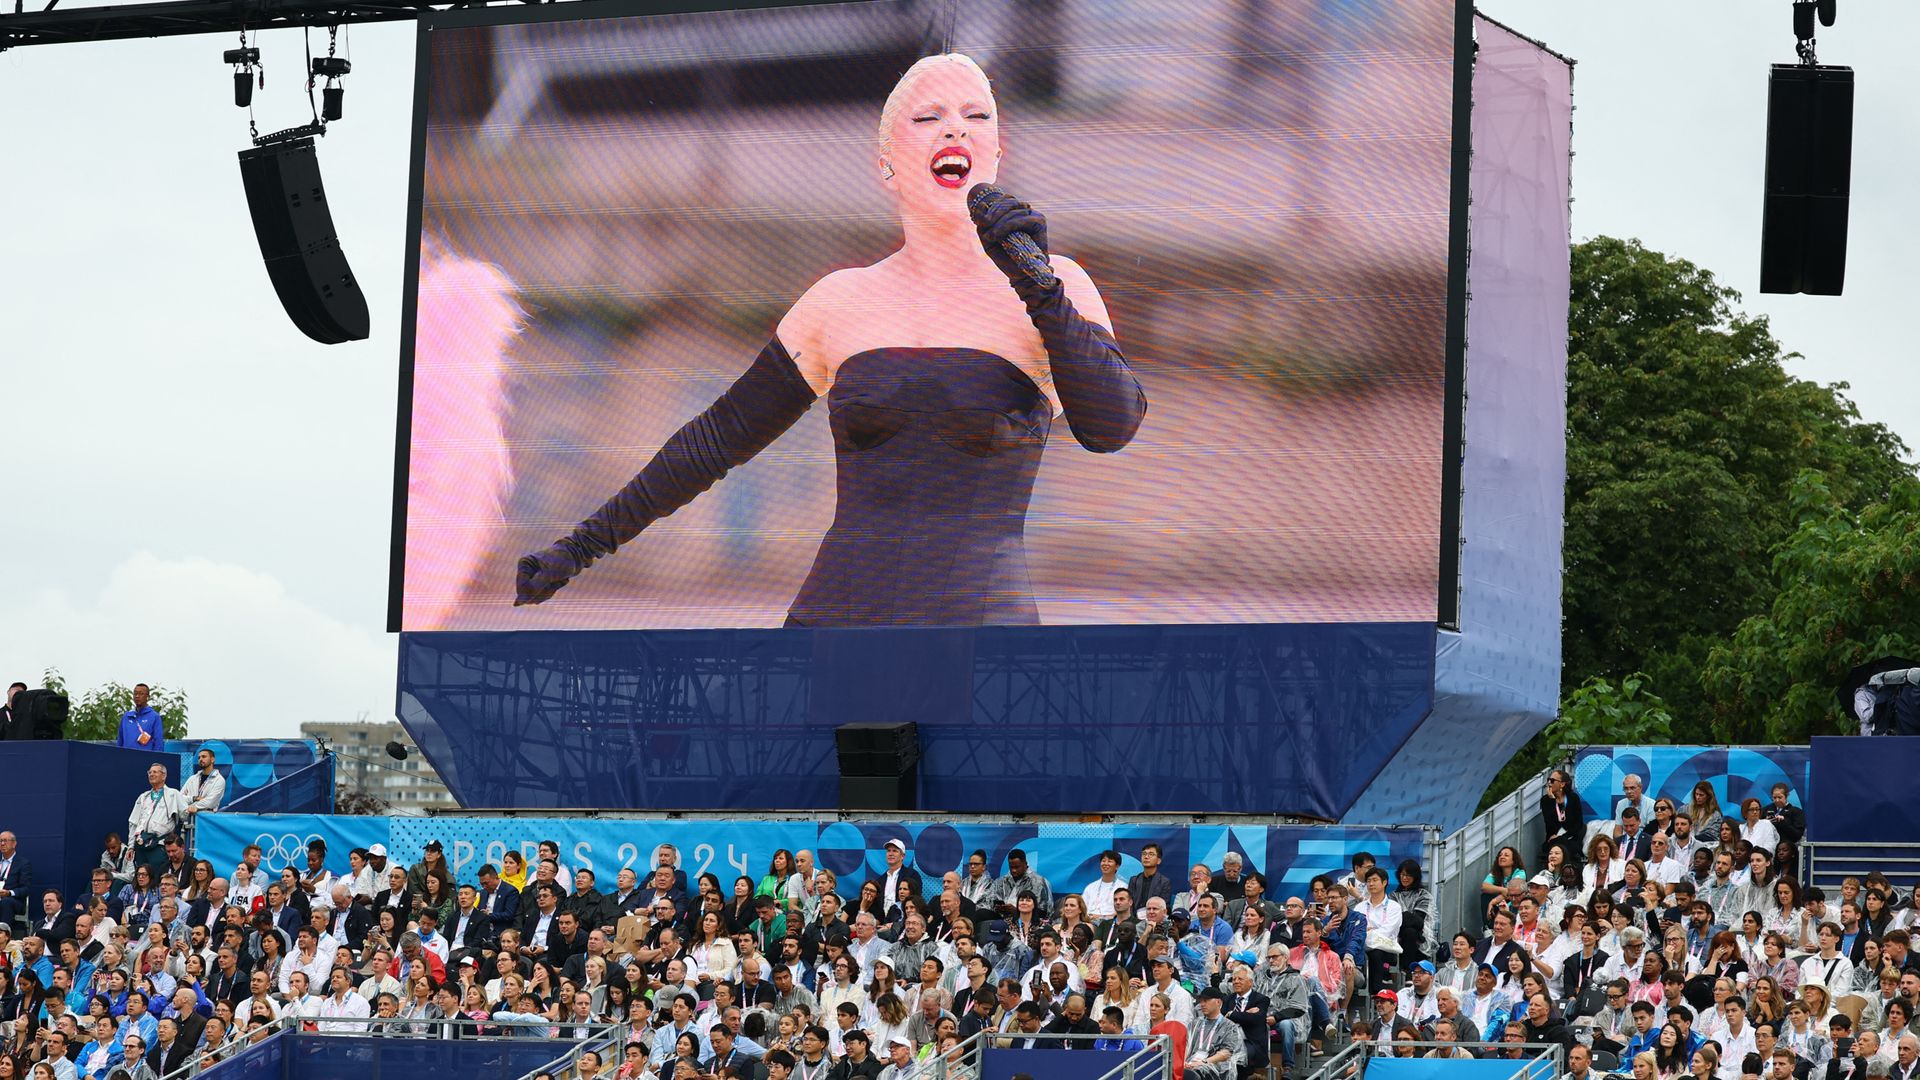 Olympics opening ceremony gets under way with starring roles for Lady Gaga and Zinedine Zidane